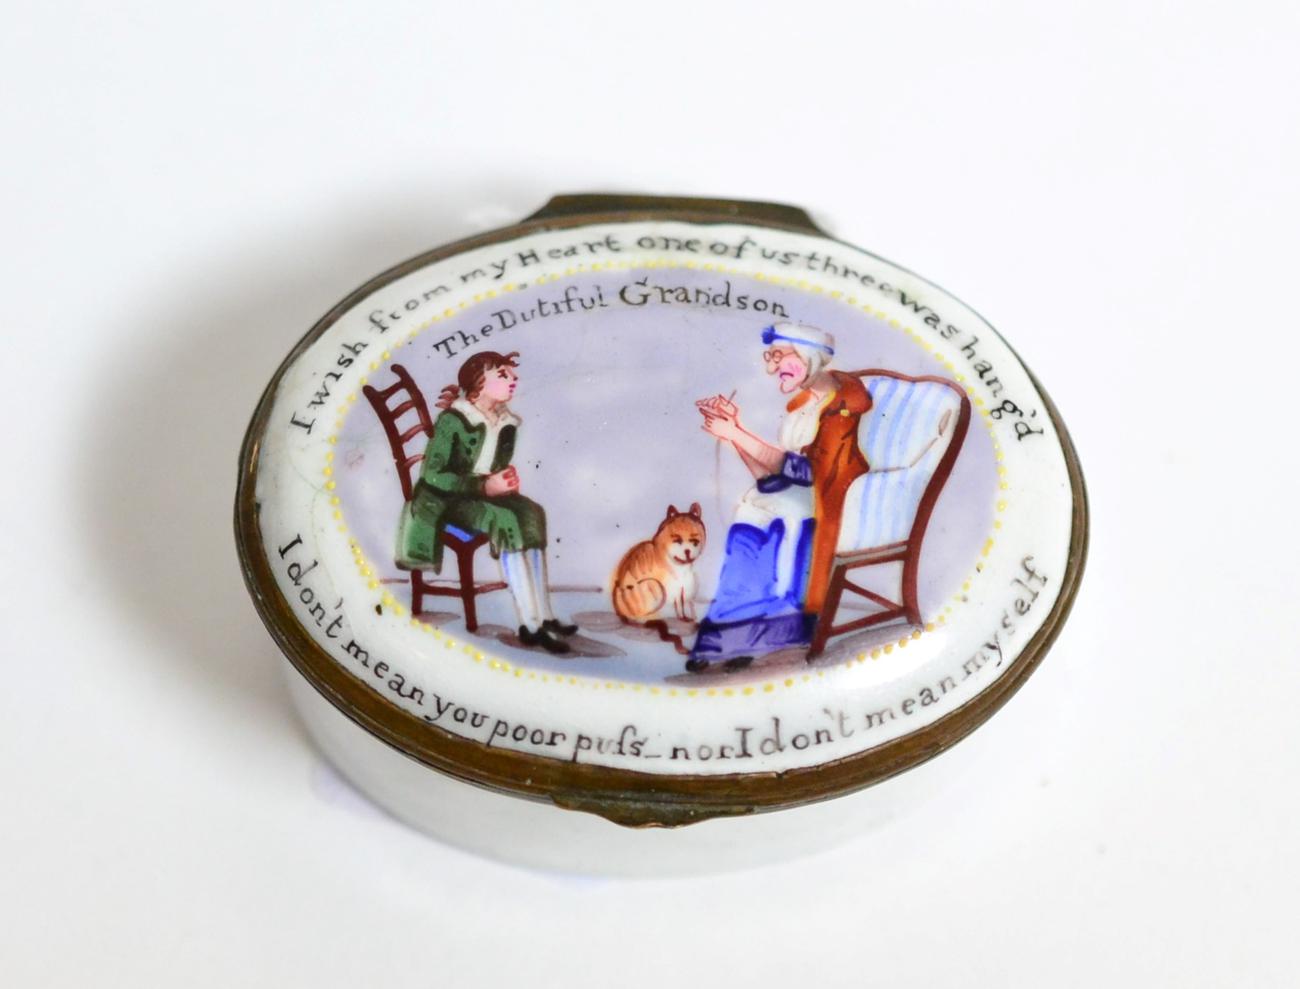 Lot 61 - An oval enamel patch box depicting seated figures and a cat, circa 1800